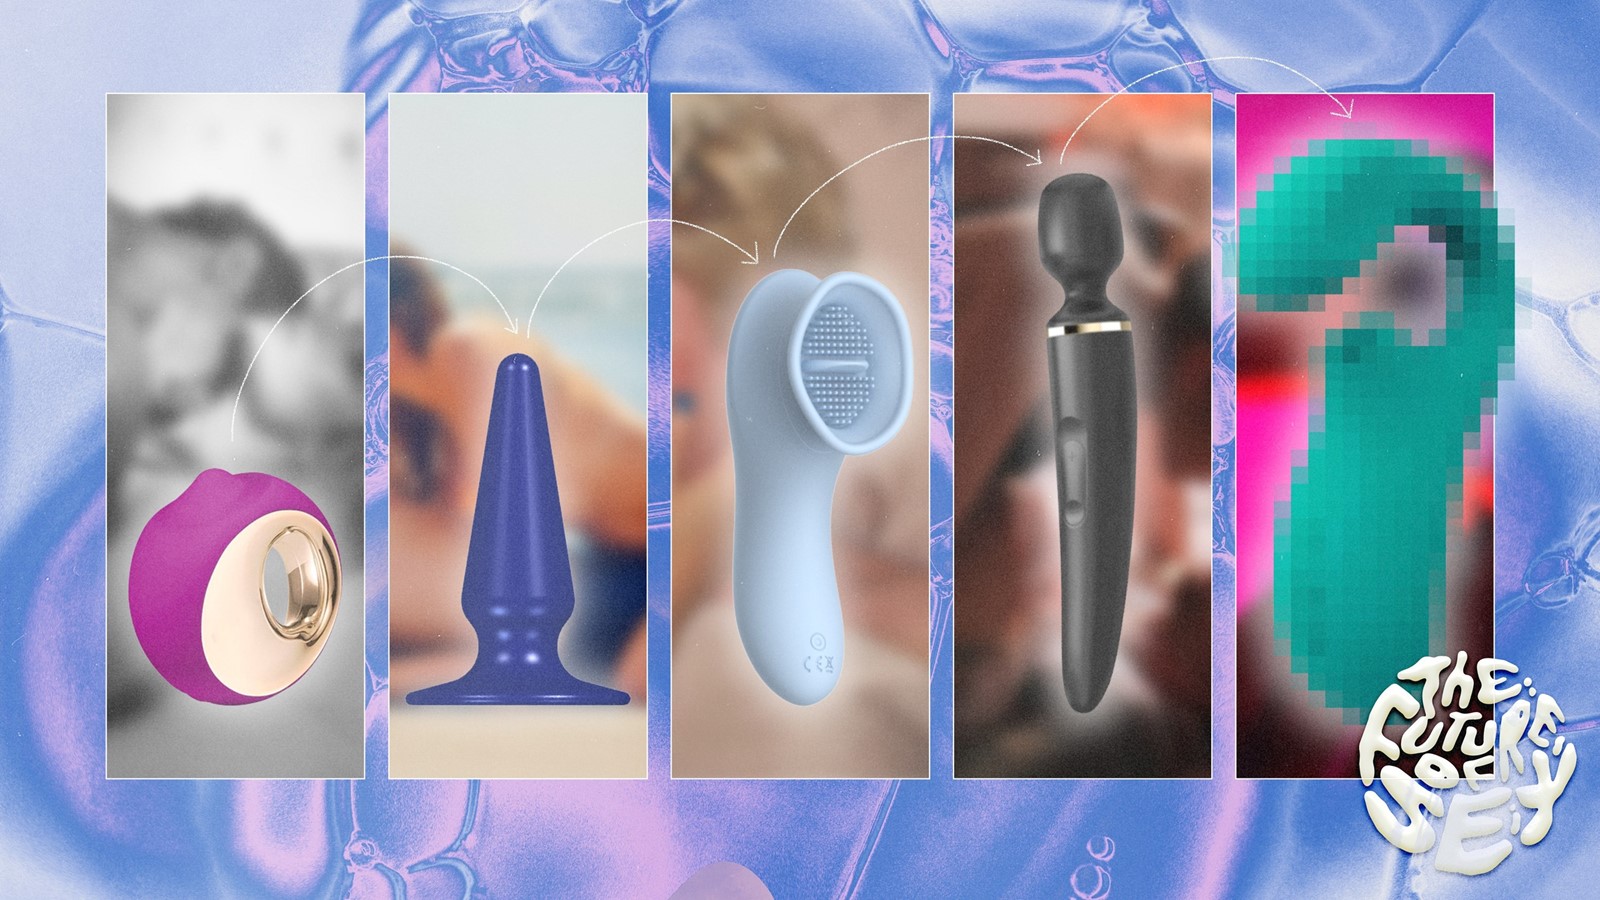 the future of sex toys v3